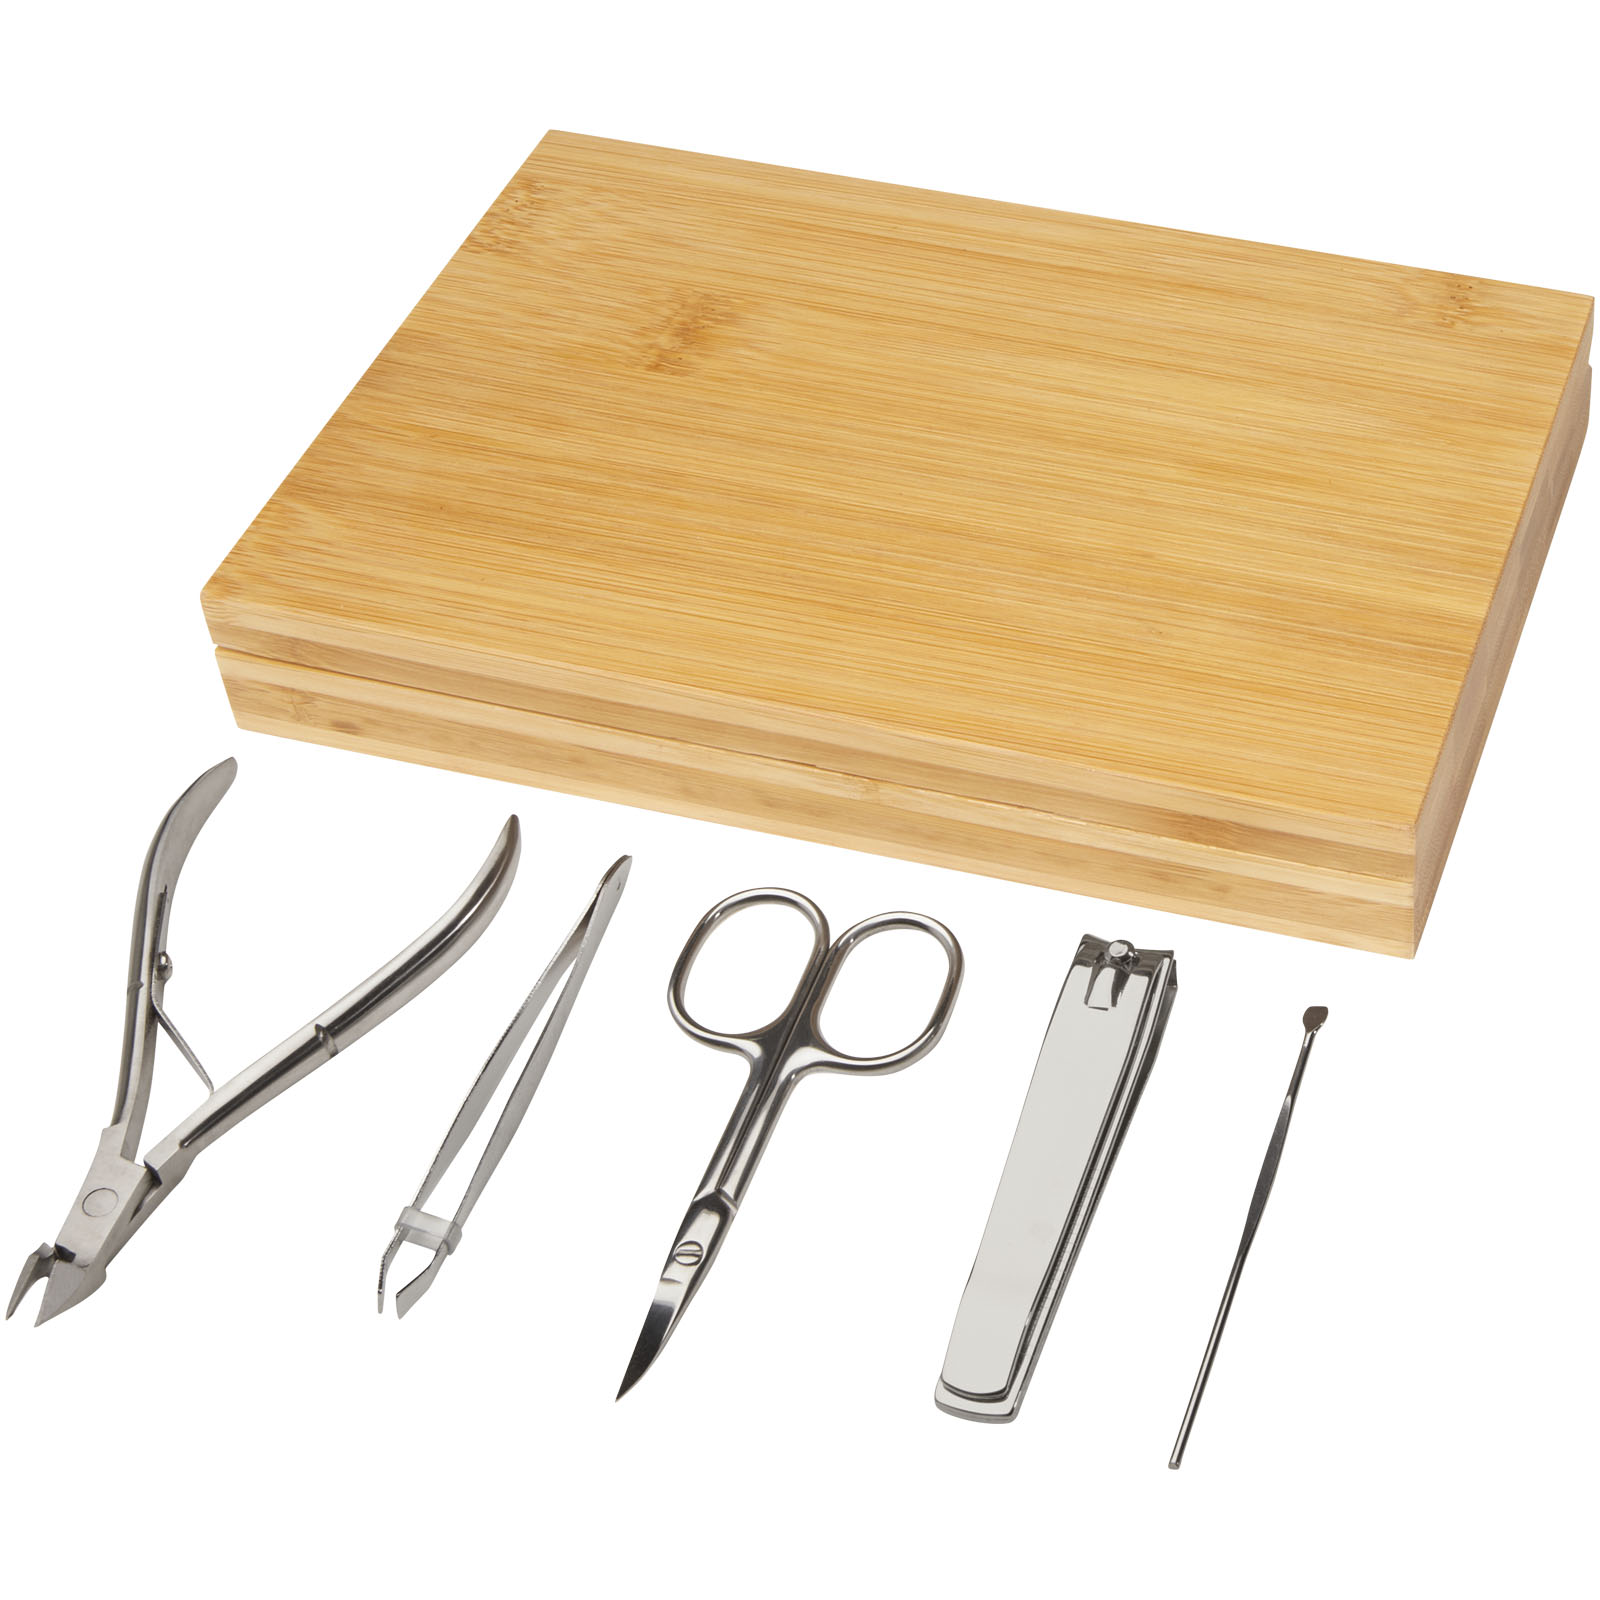 Metal manicure set BARGES in bamboo case, 5 pcs - natural